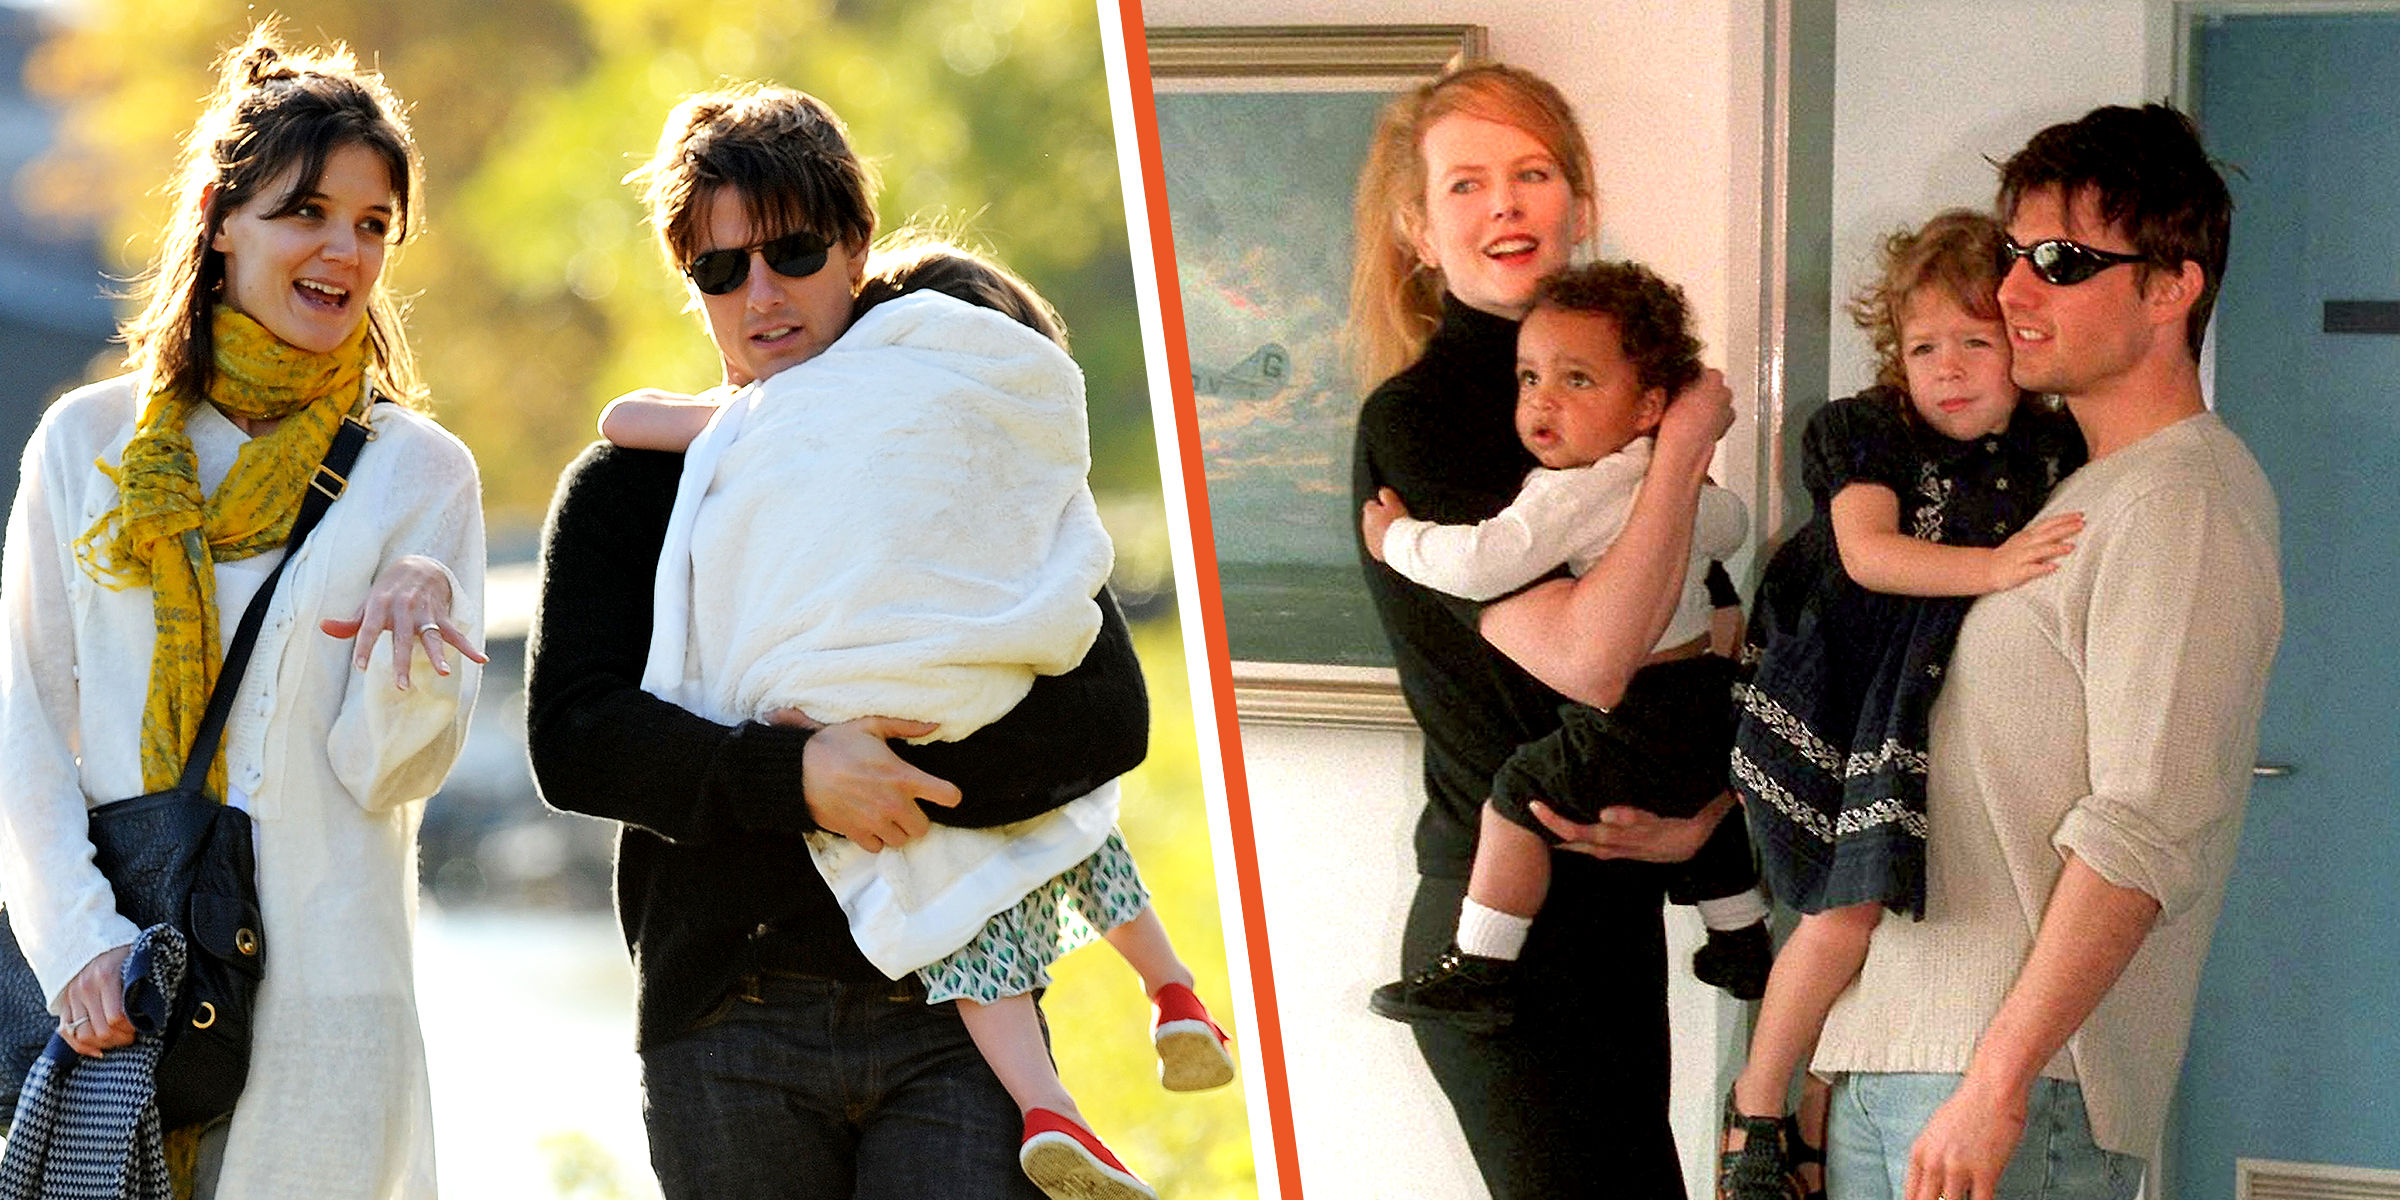 A famous actress and Tom Cruise with their daughter. | Nicole Kidman, Connor, Bella, and Tom Cruise | Source: Getty Images